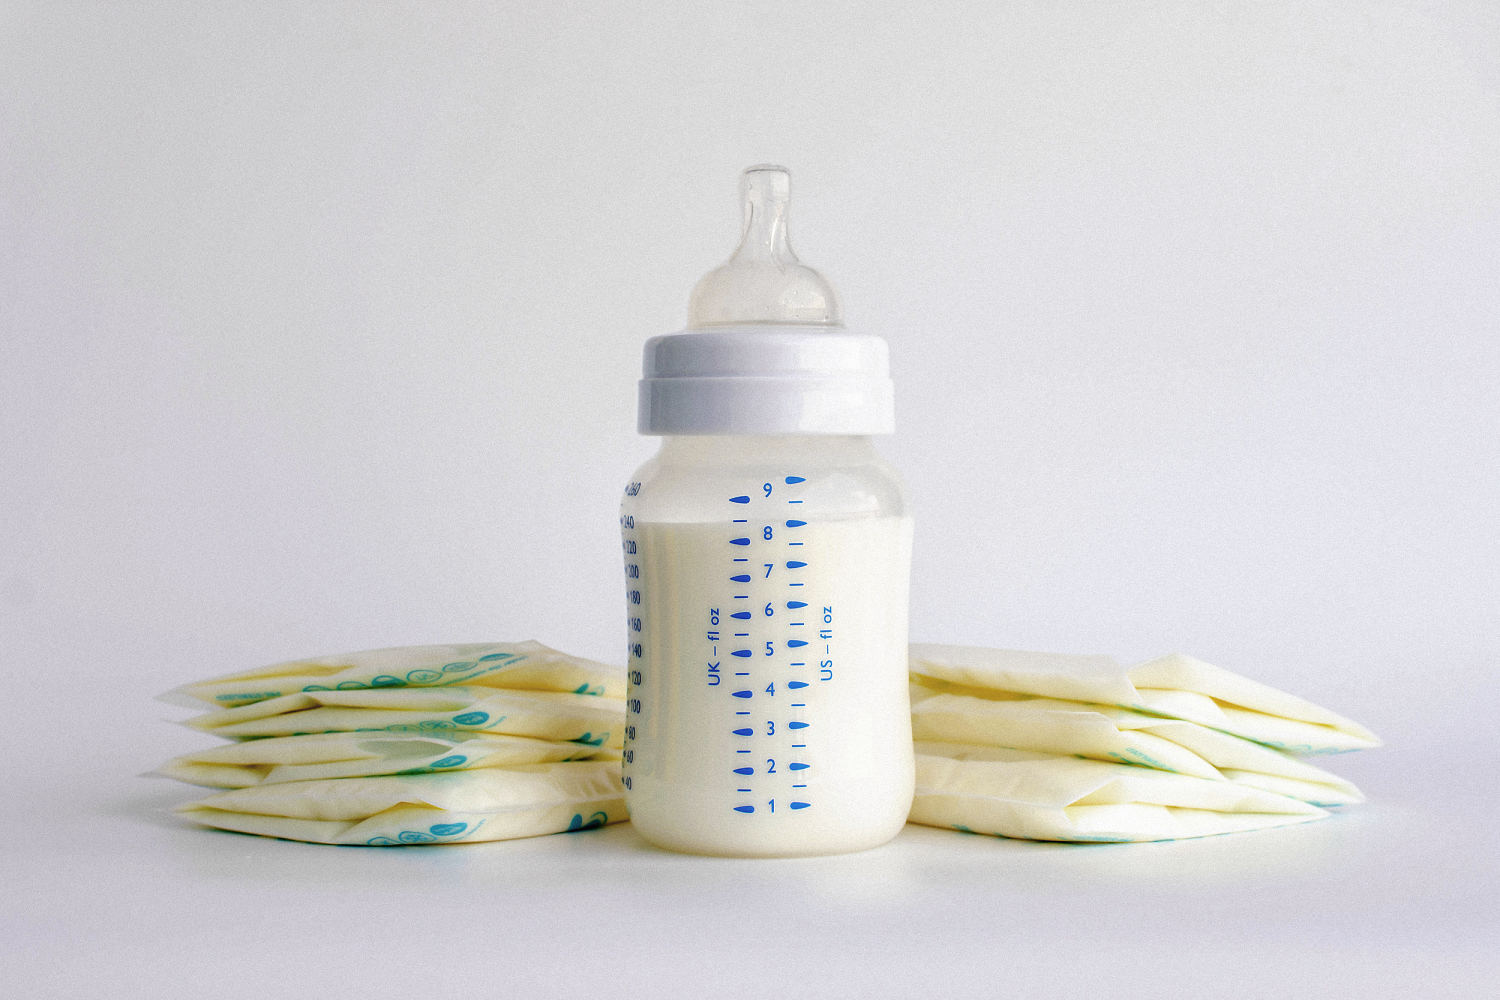 Georgia father sentenced to 50 years for poisoning his newborn's breastmilk with antifreeze